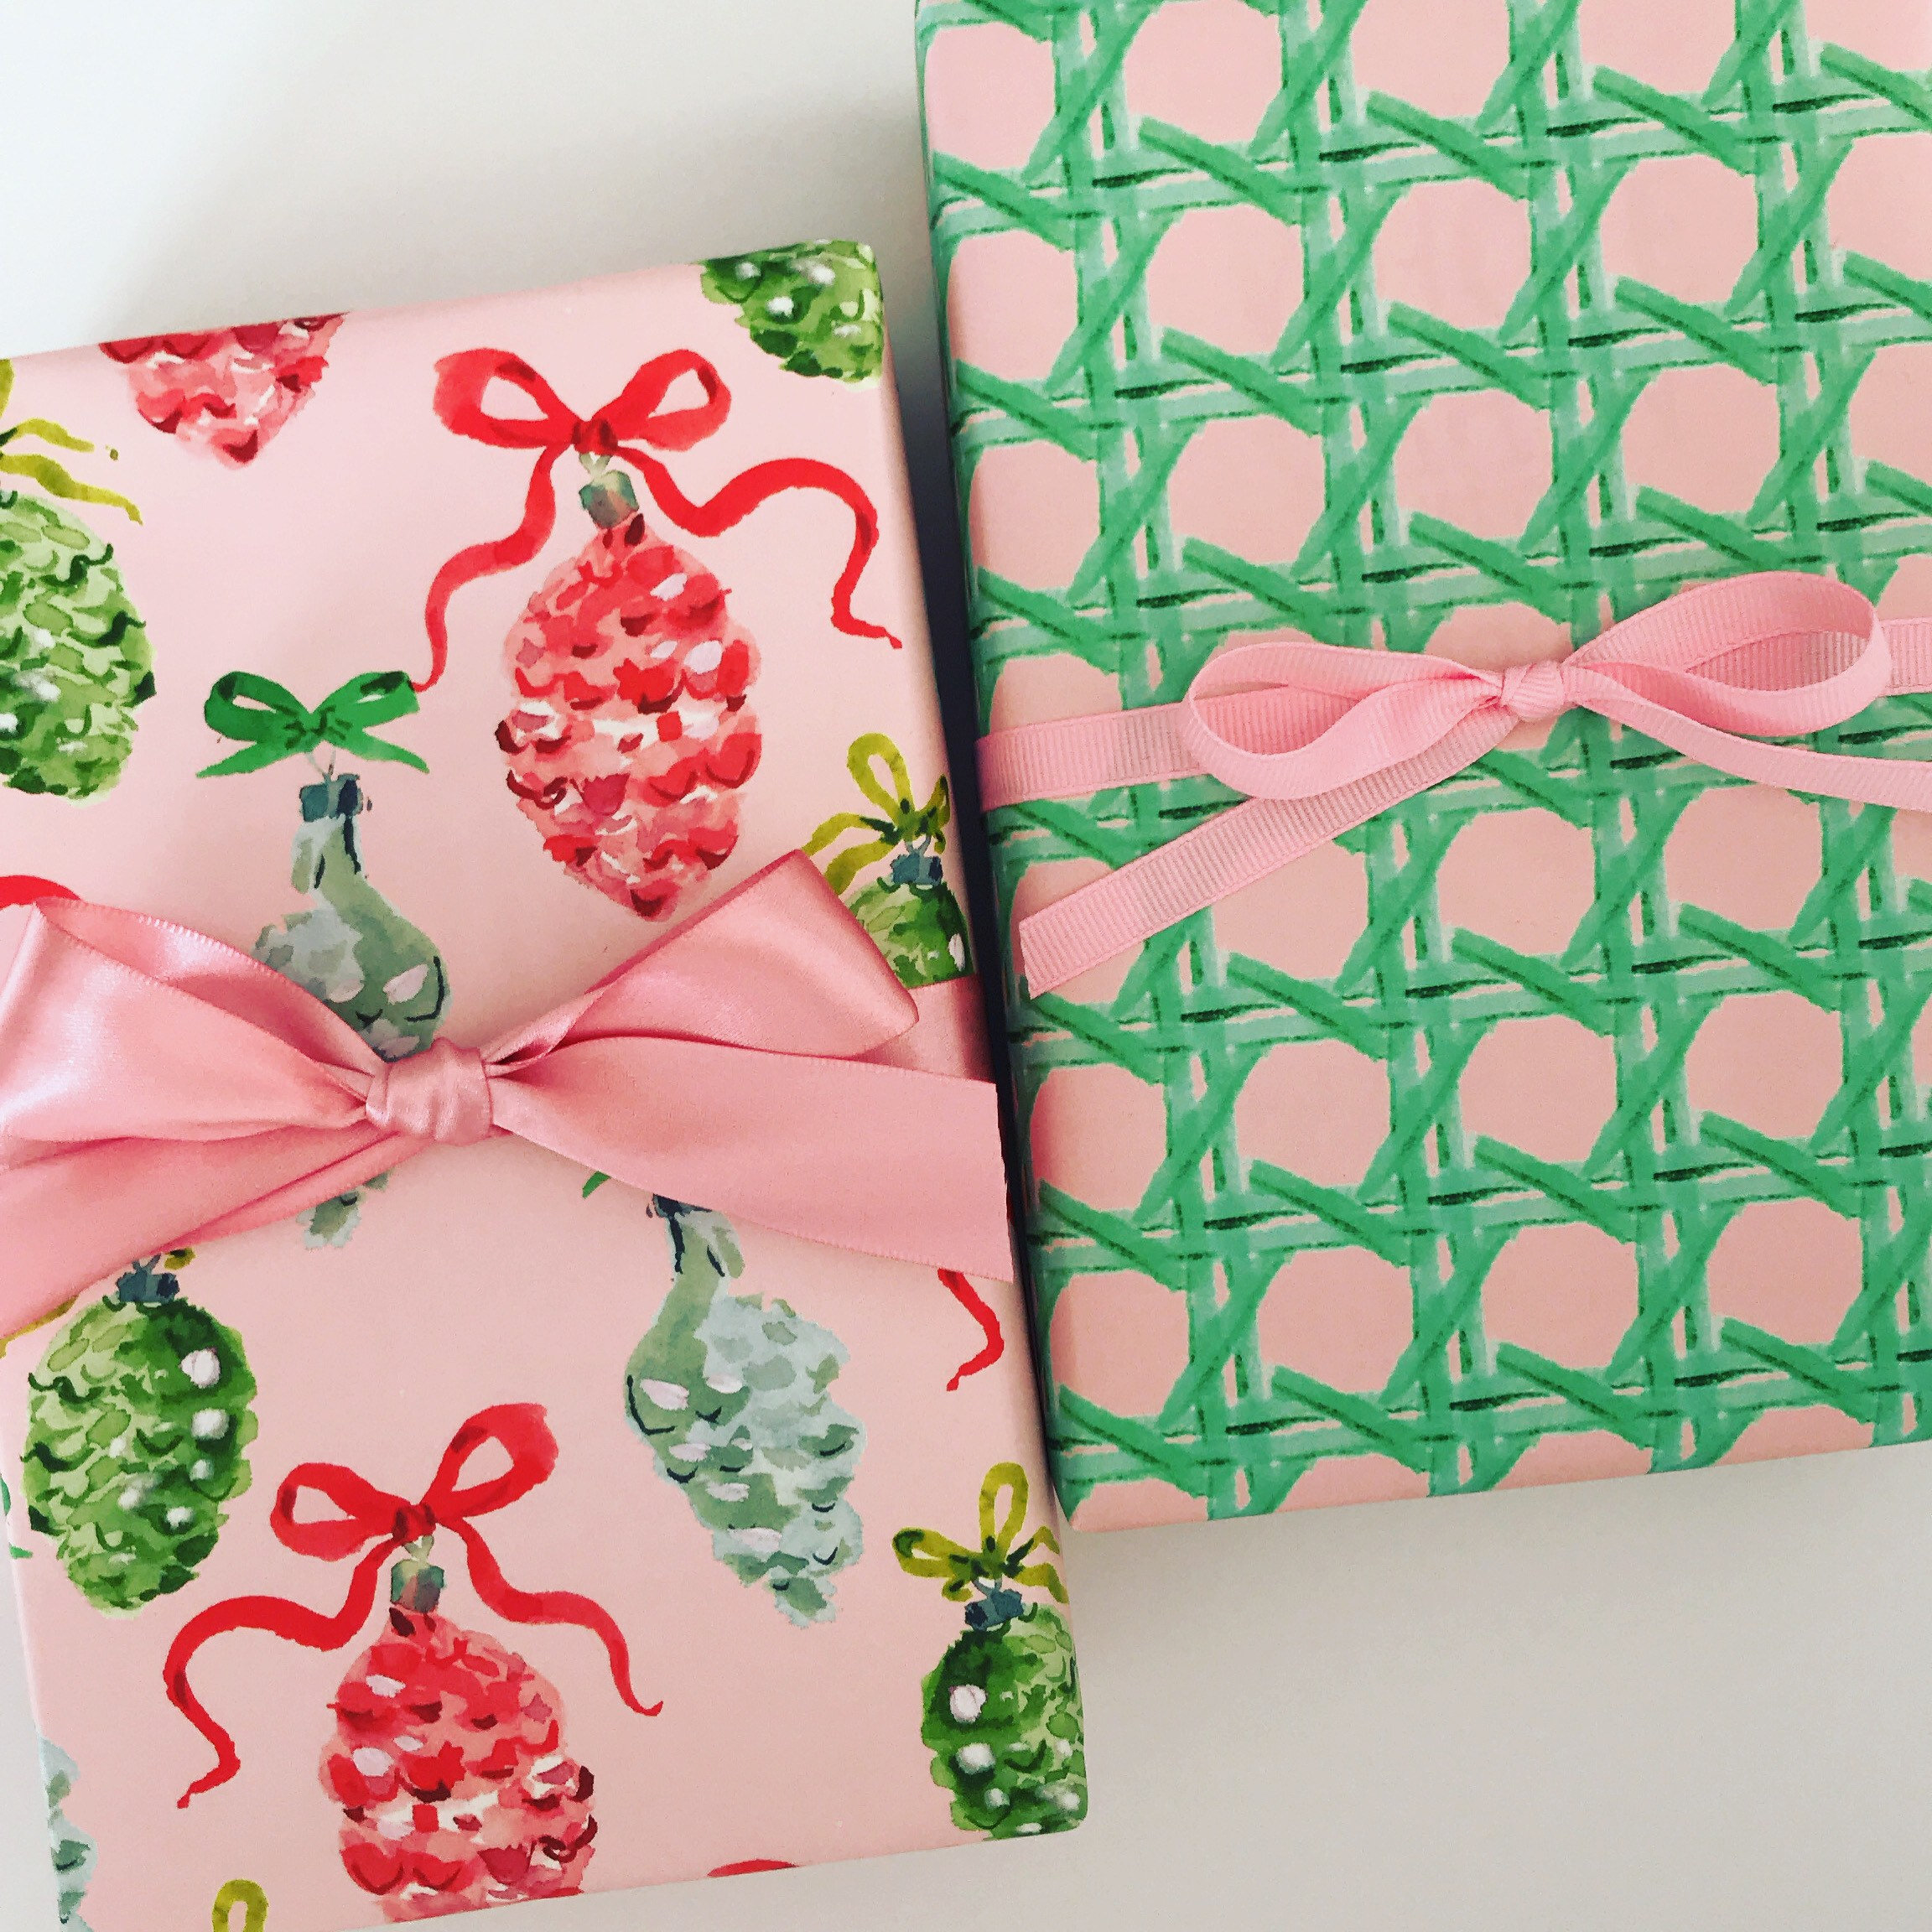 Pink Retro Christmas Wrapping Paper, Pink Floral Christmas Gift